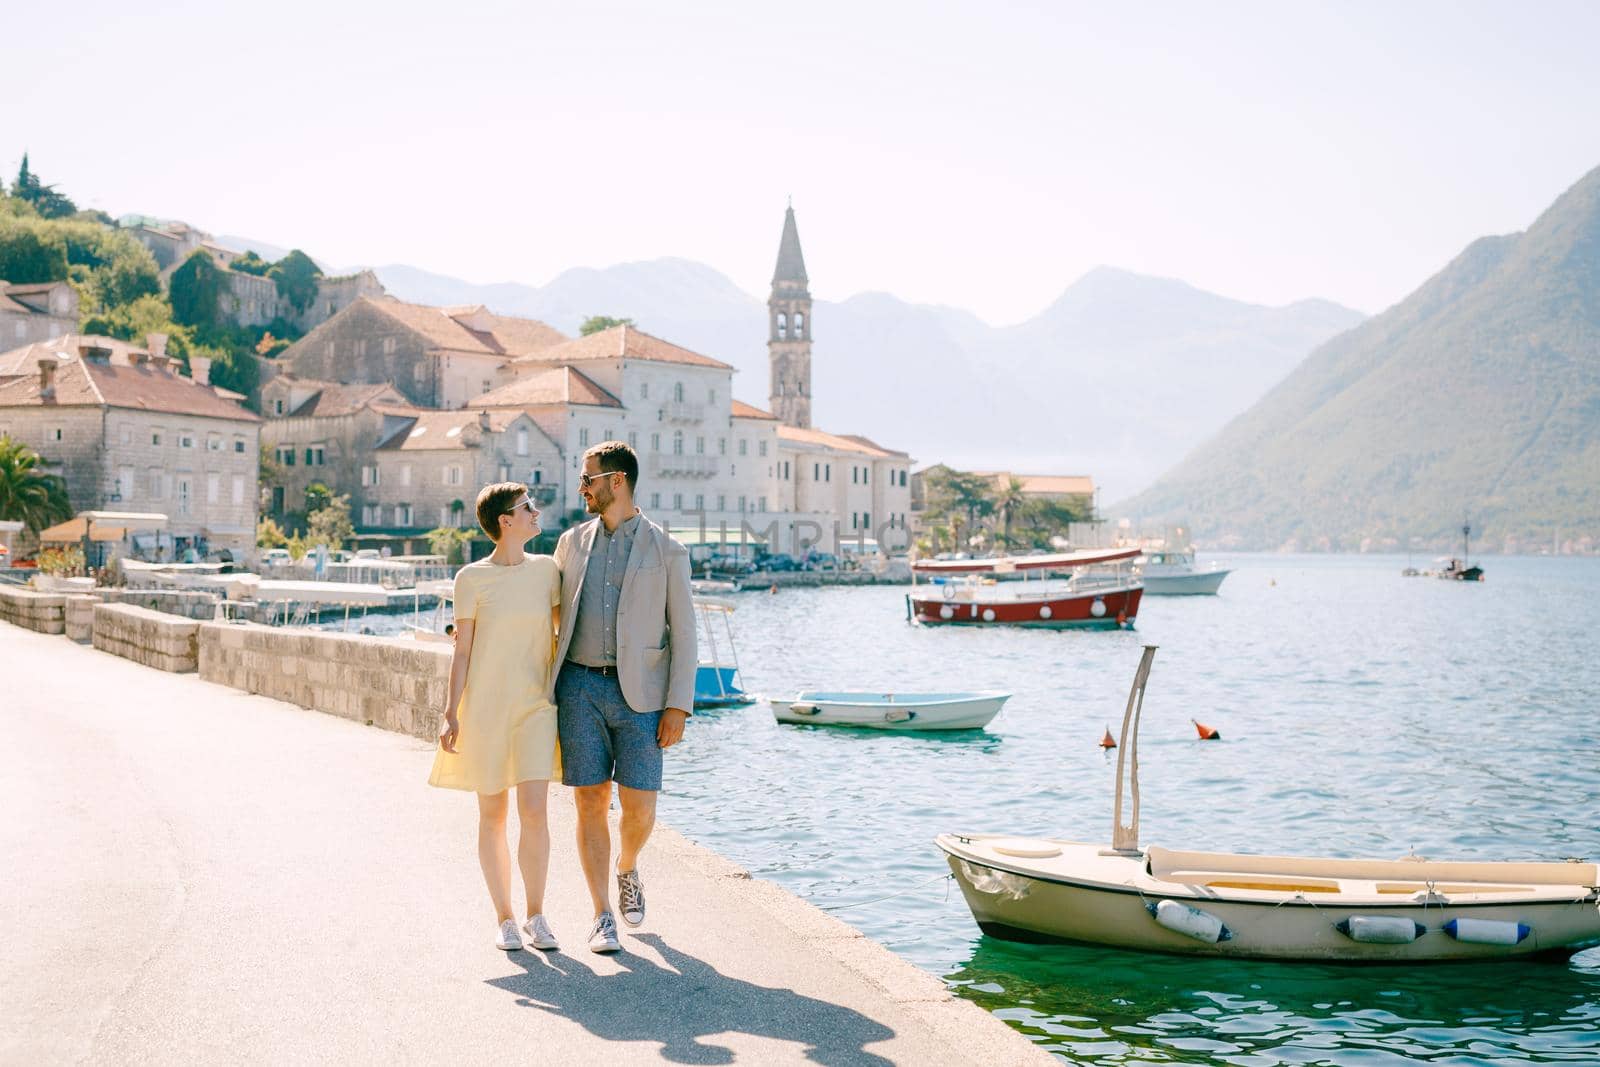 A man and a woman in sunglasses walk hugging each other on the pier near the boats in old town of Perast by Nadtochiy